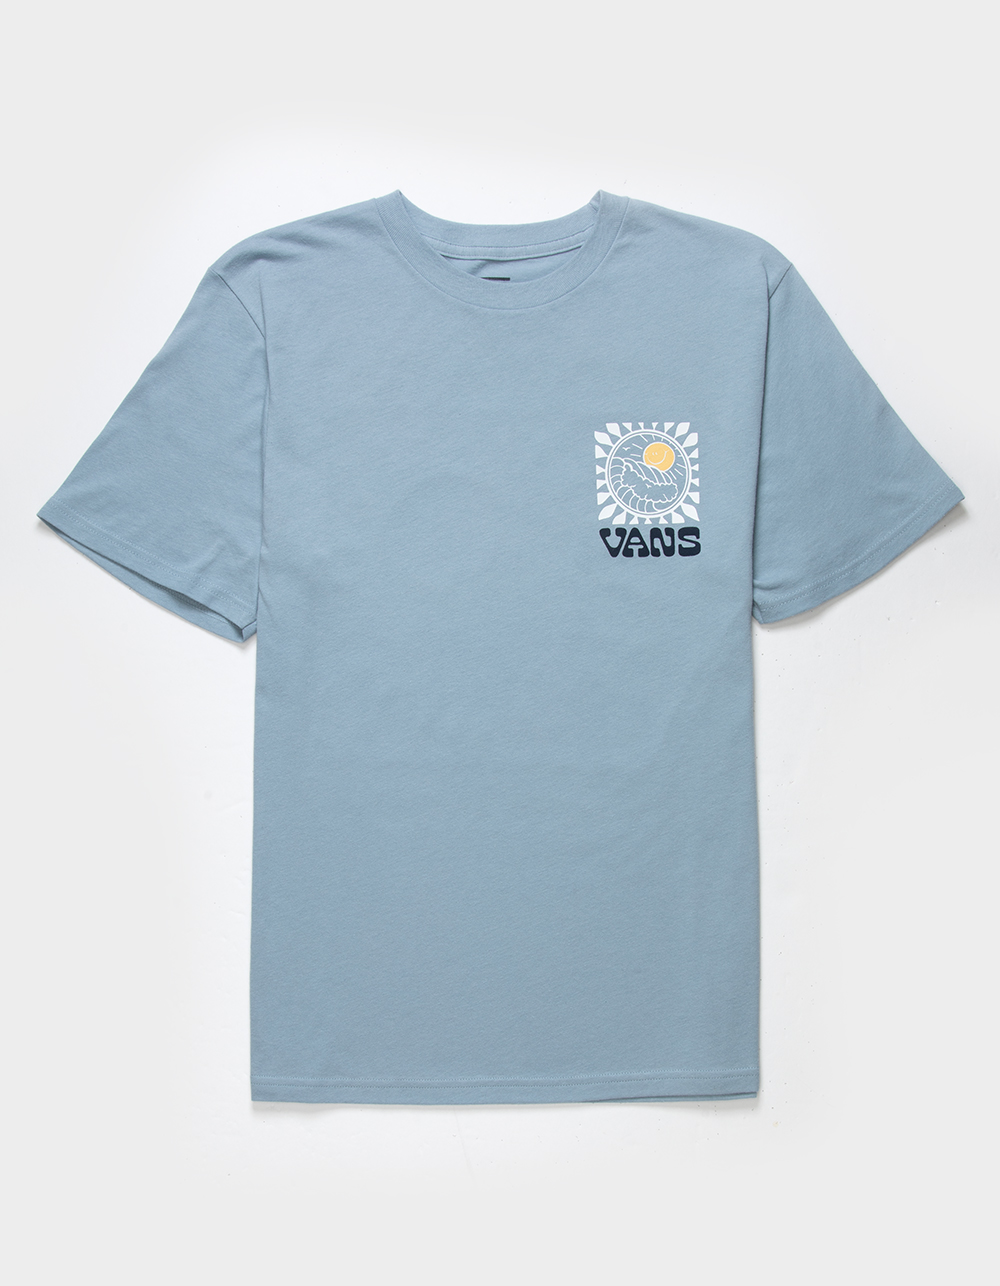 VANS Rise And Shine Boys Tee - DUSTY BLUE | Tillys